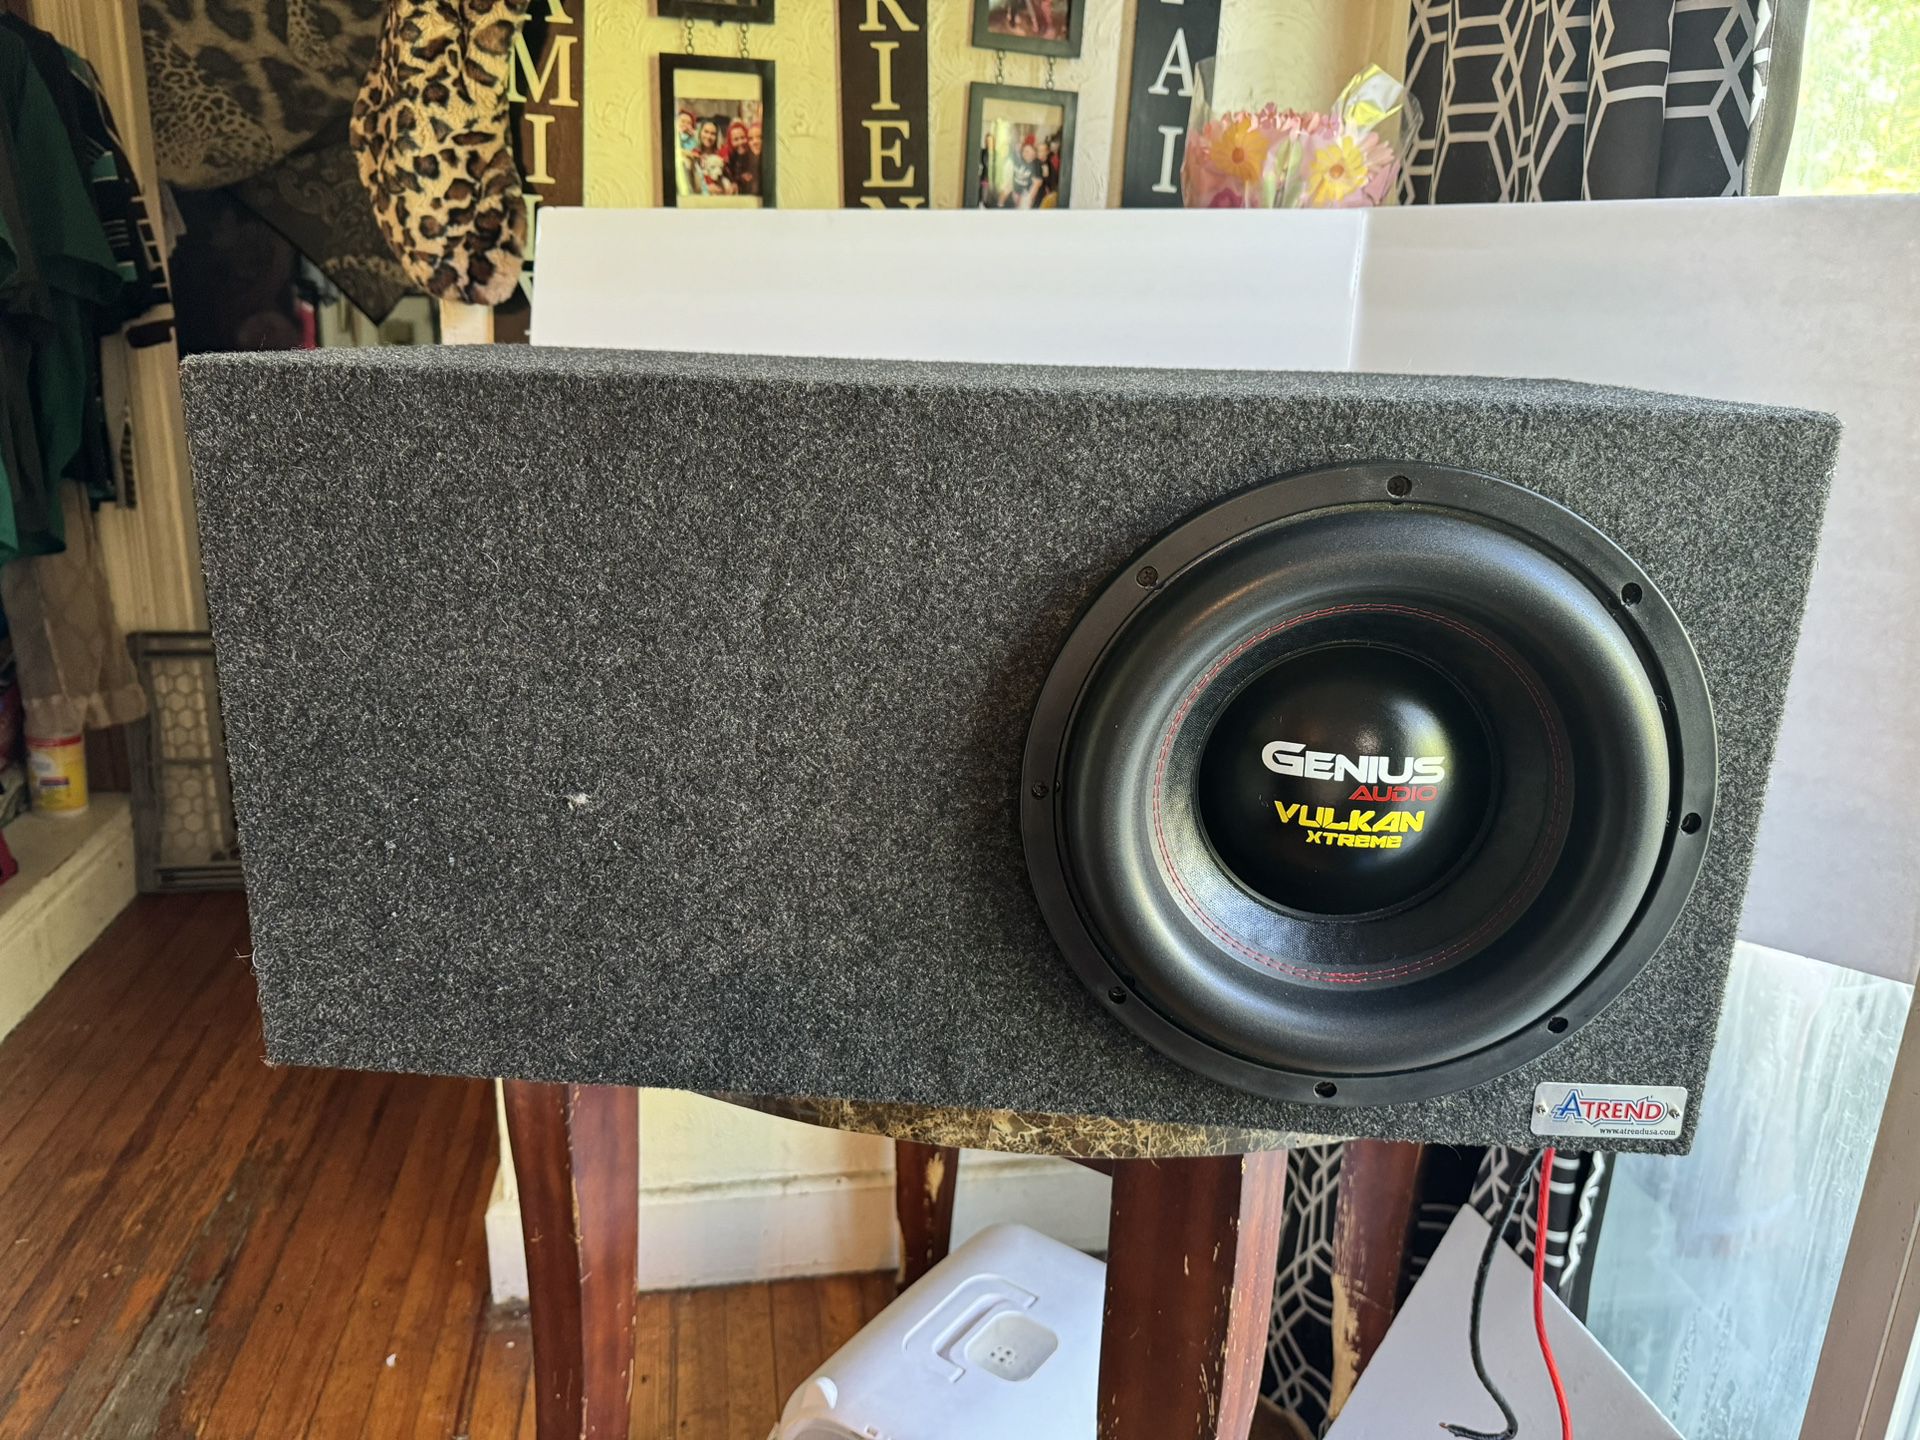 Pure Competition Beast 12"Genius audio V9 Vulkan in Ported Atrend Sol box 